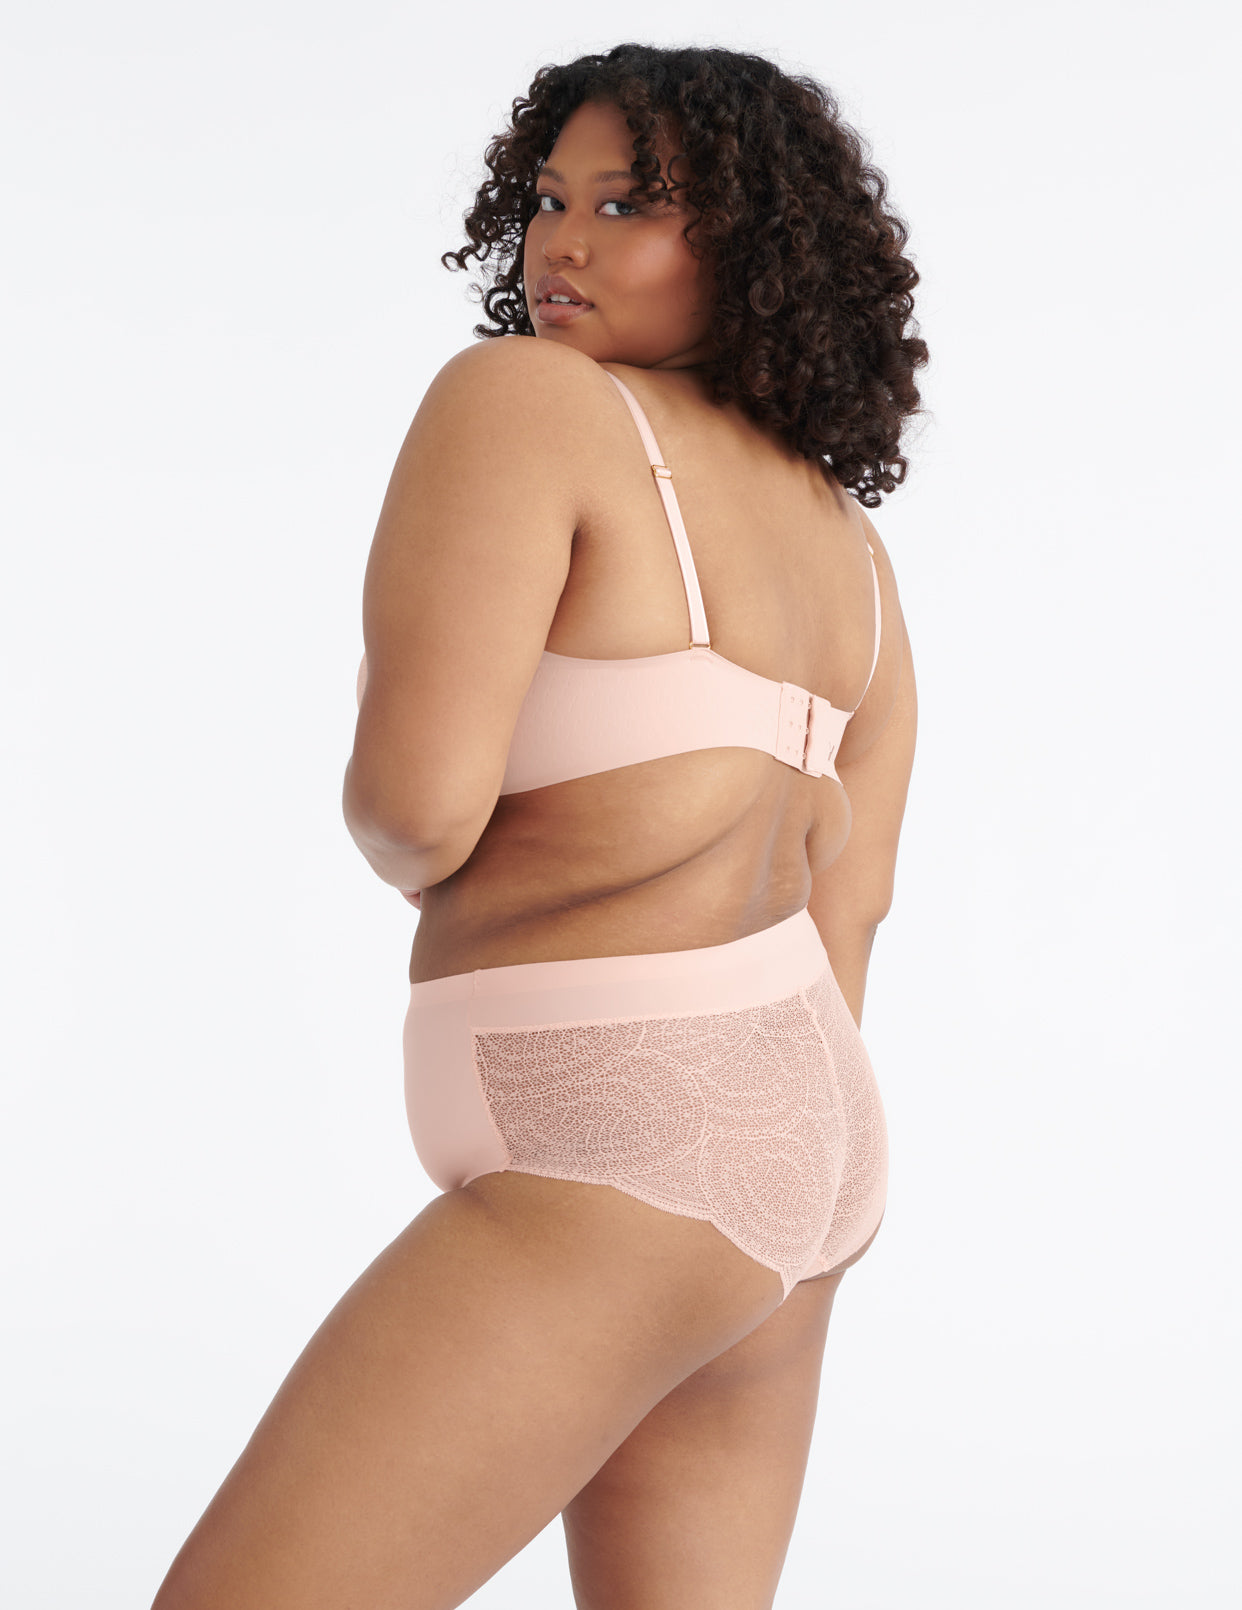 Analysa has 46.5" hips and wears a Knix size XL 